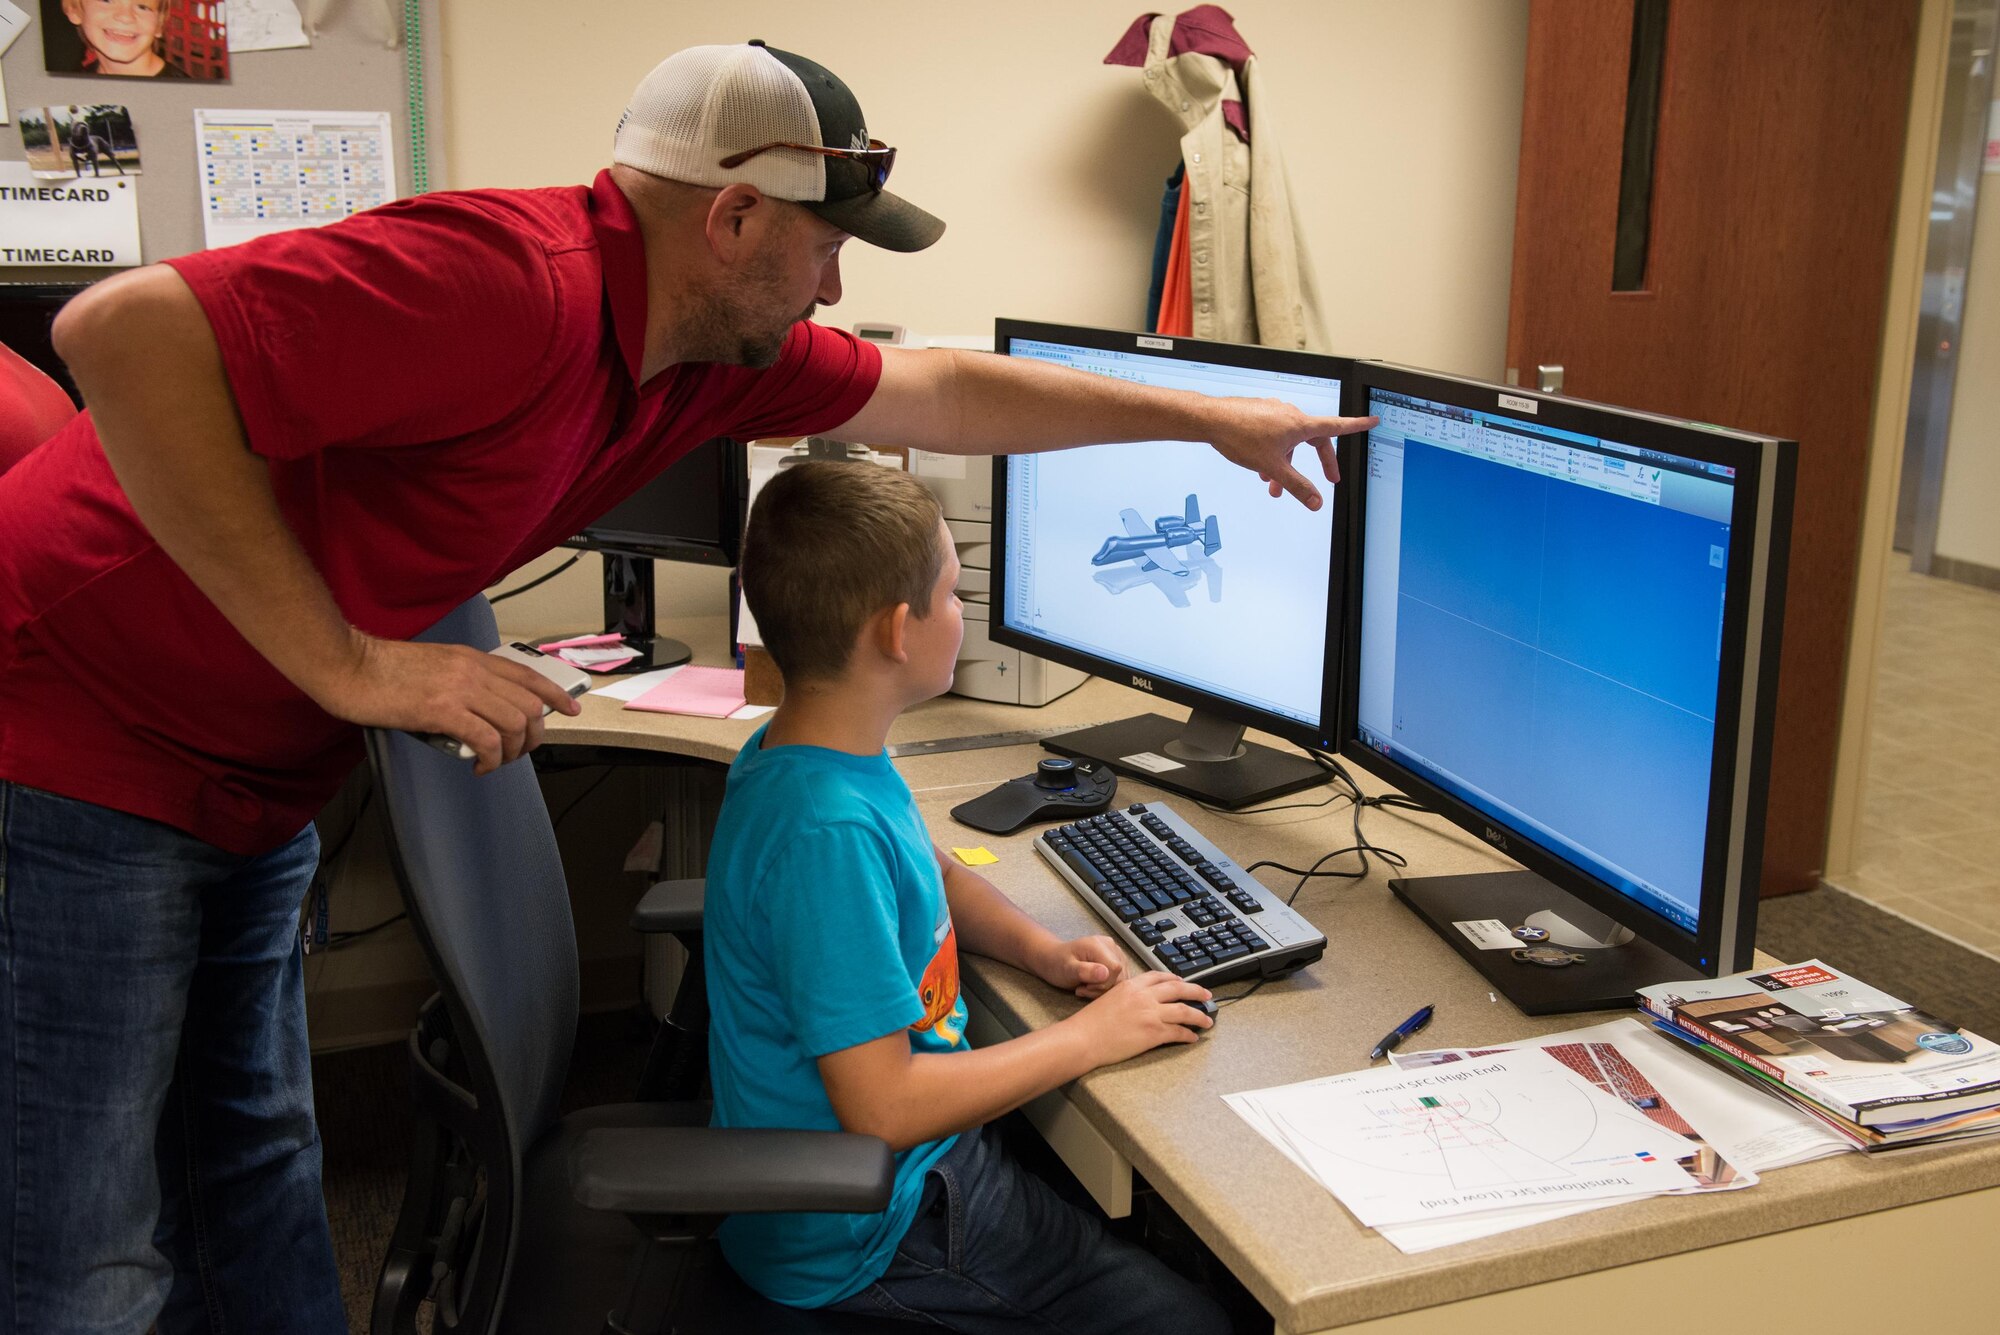 Heath Harris, 81st Training Support Squadron technical engineer, demonstrates computer design software to a student from the Science, Technology, Engineering, and Mathematics  Camp June 23, 2016, on Keesler Air Force Base, Miss. Keesler partnered with the Biloxi School District, Biloxi, Miss. in a week-long summer program designed to educate and enrich middle school students interested in science, technology, engineering or mathematics. (U.S. Air Force photo by Marie Floyd/Released)